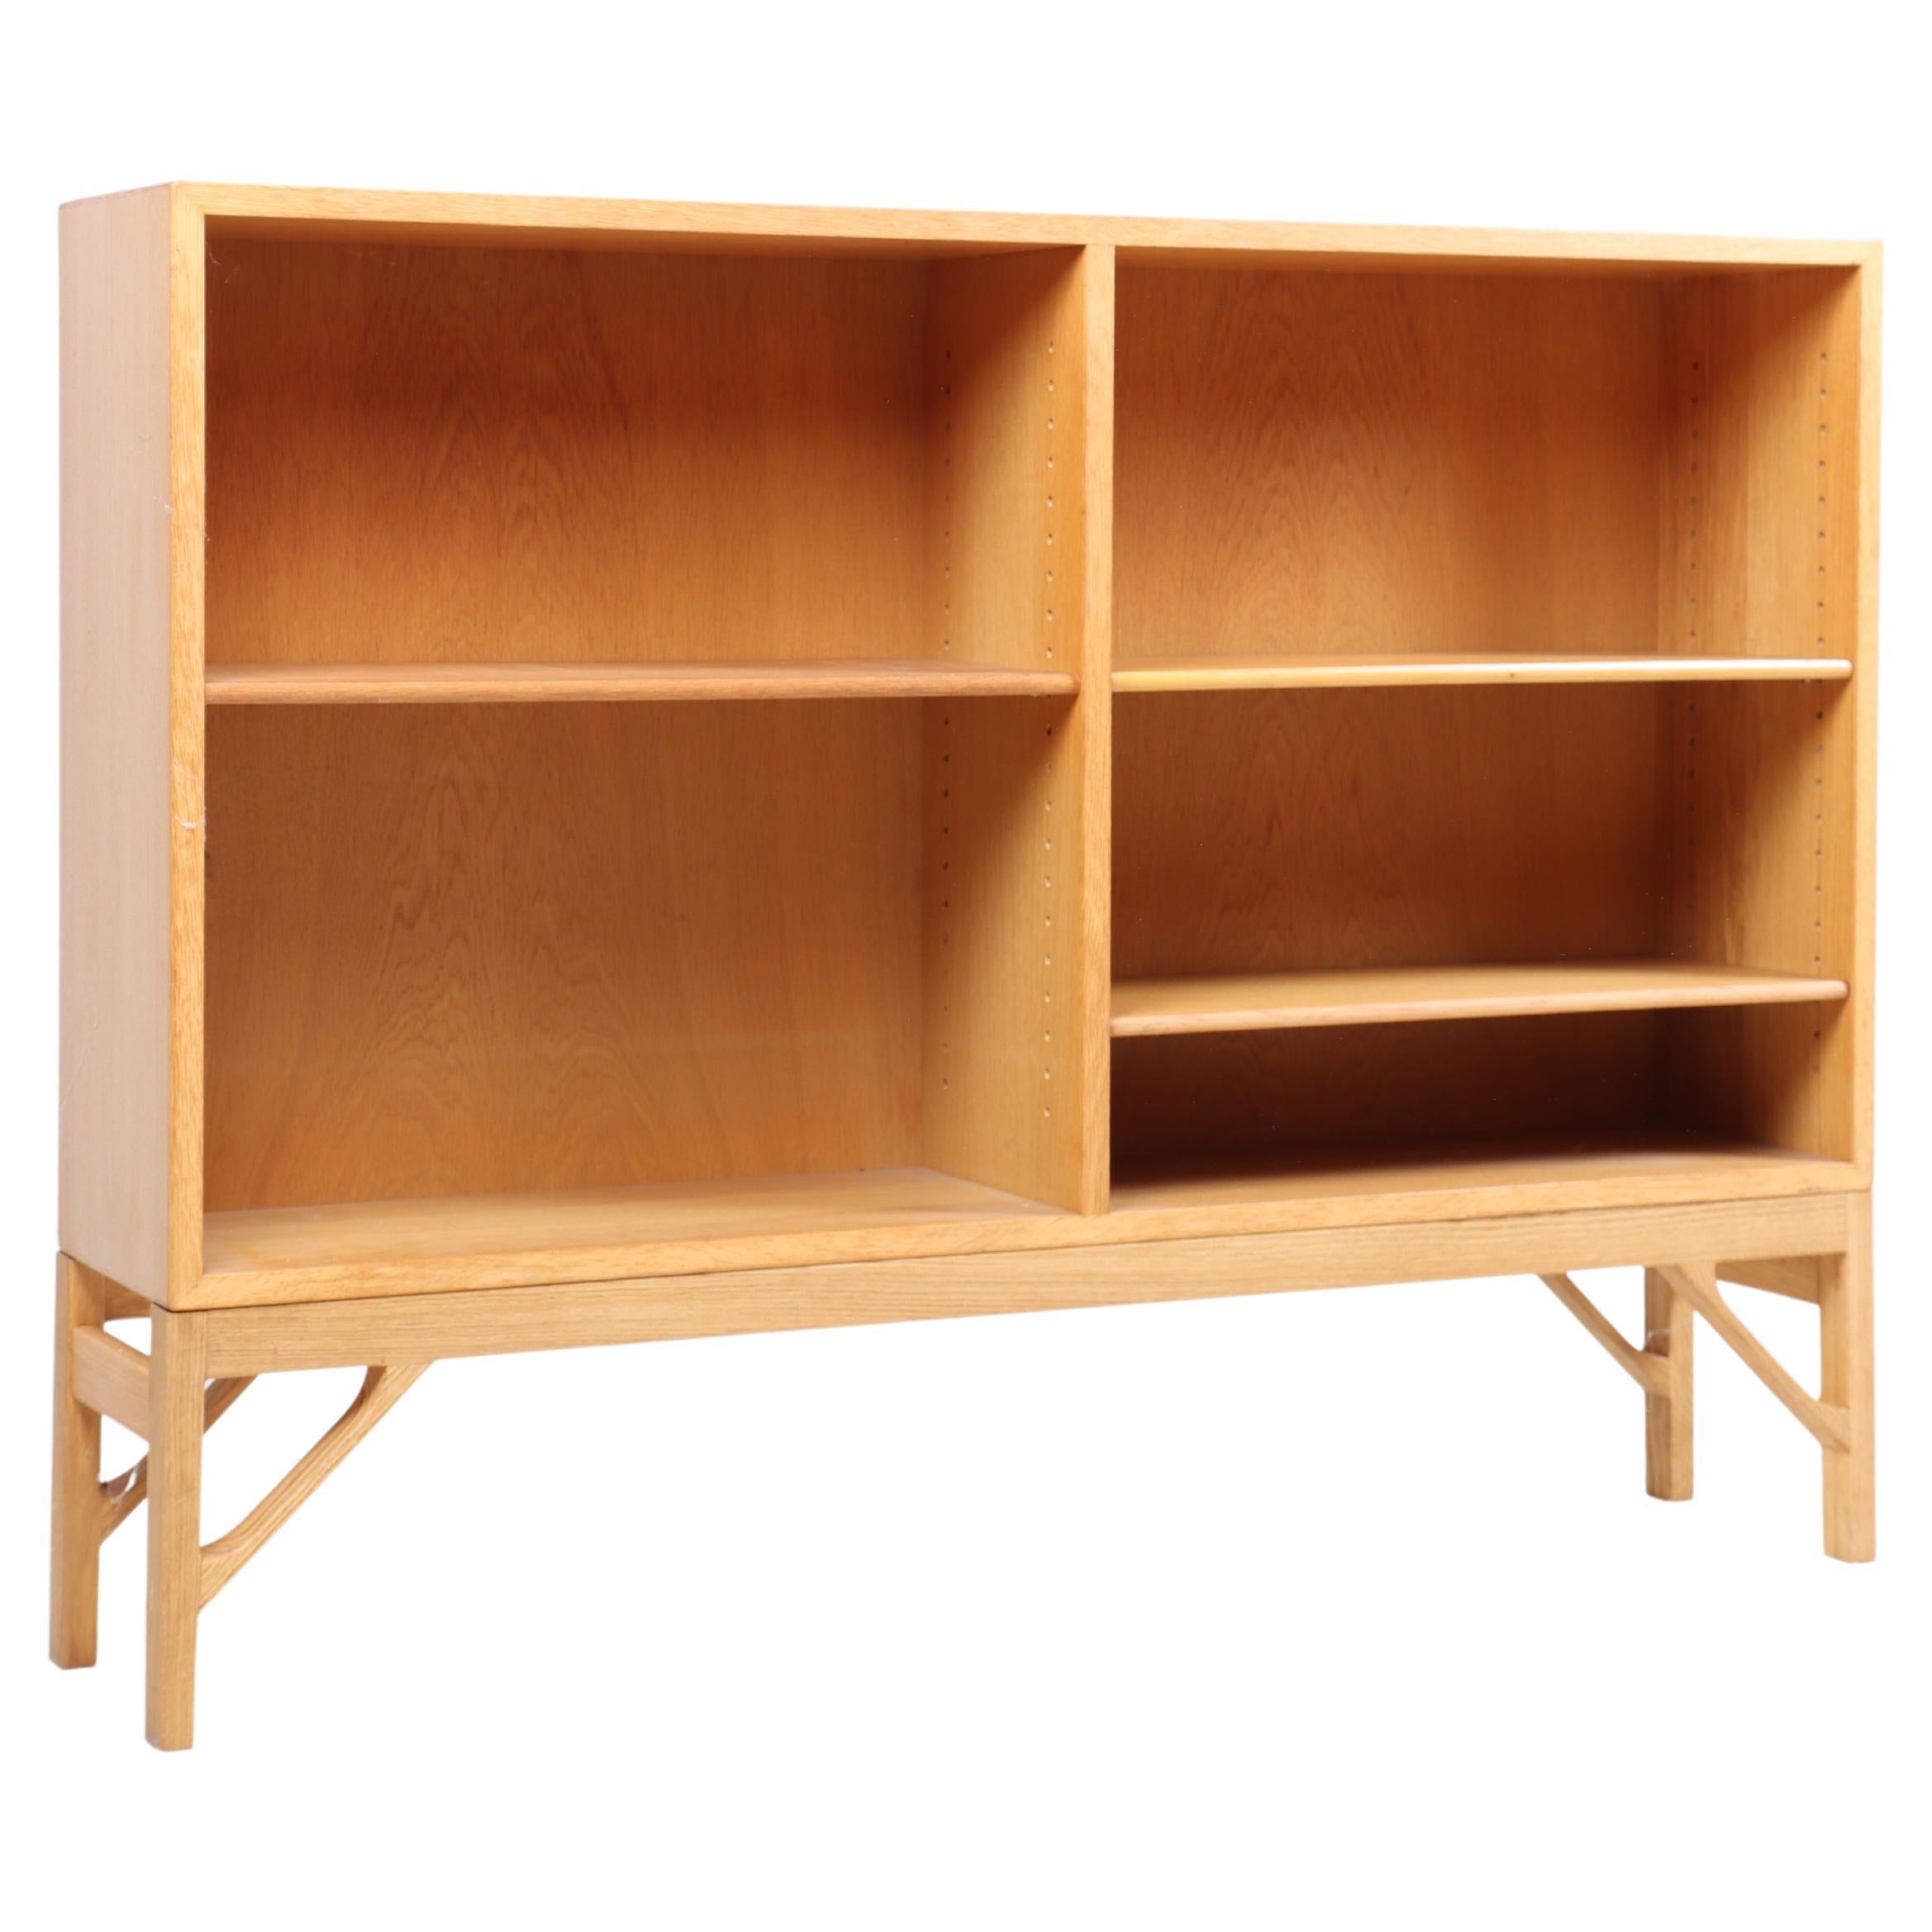 Low China bookcase in oak. Designed by MAA. Børge Mogensen in 1958, this piece is made by CM Madsen cabinetmakers Denmark in the 1960s. Great original condition. More shelves available.